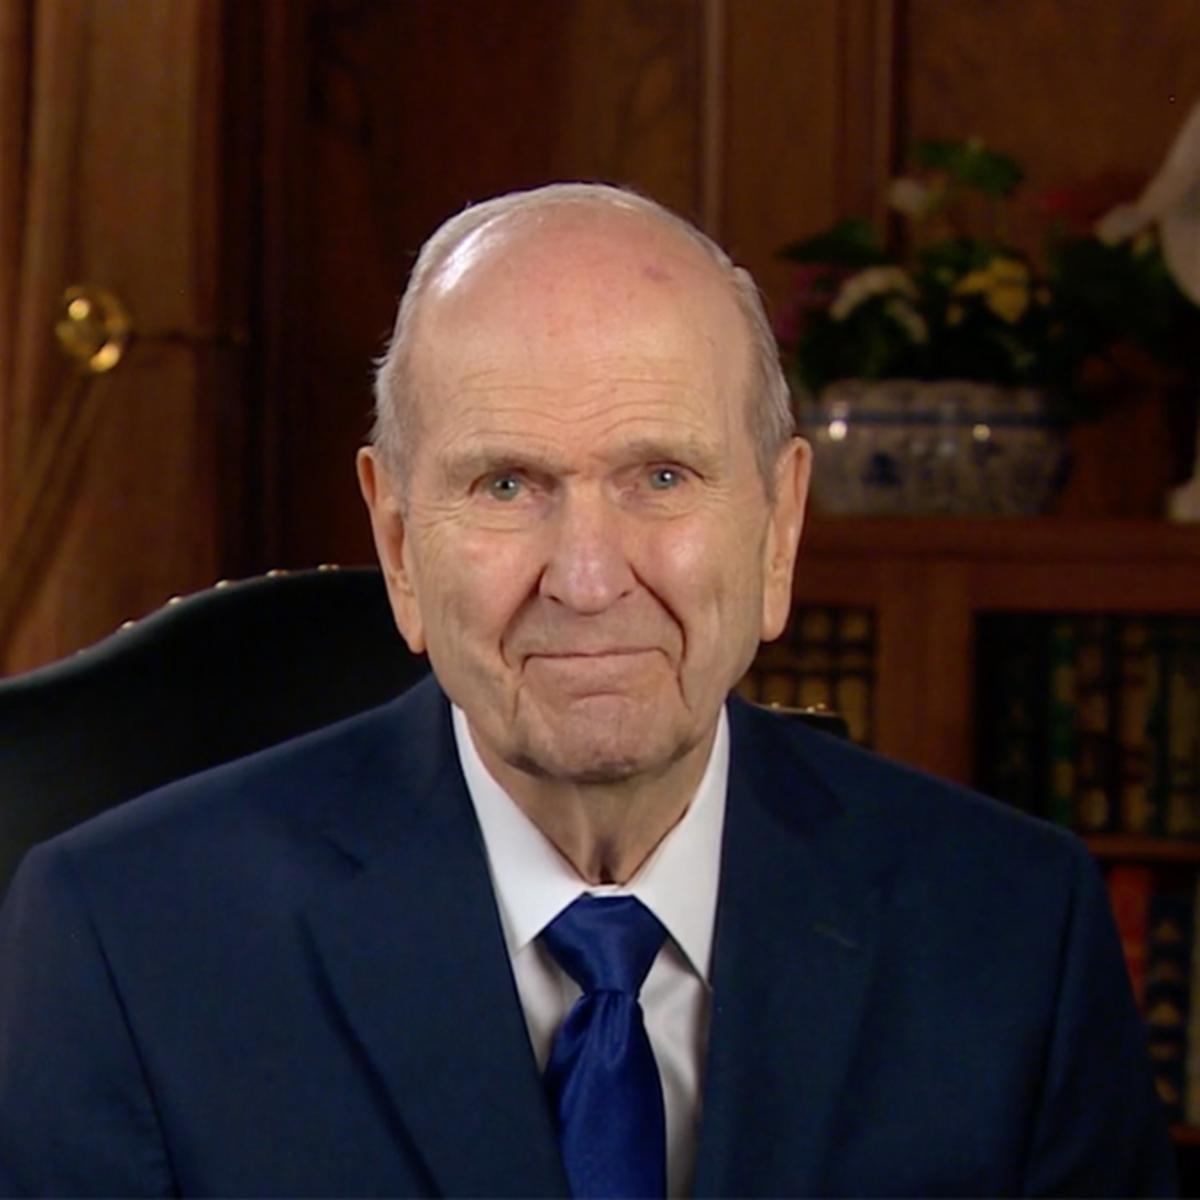 Russell M. Nelson